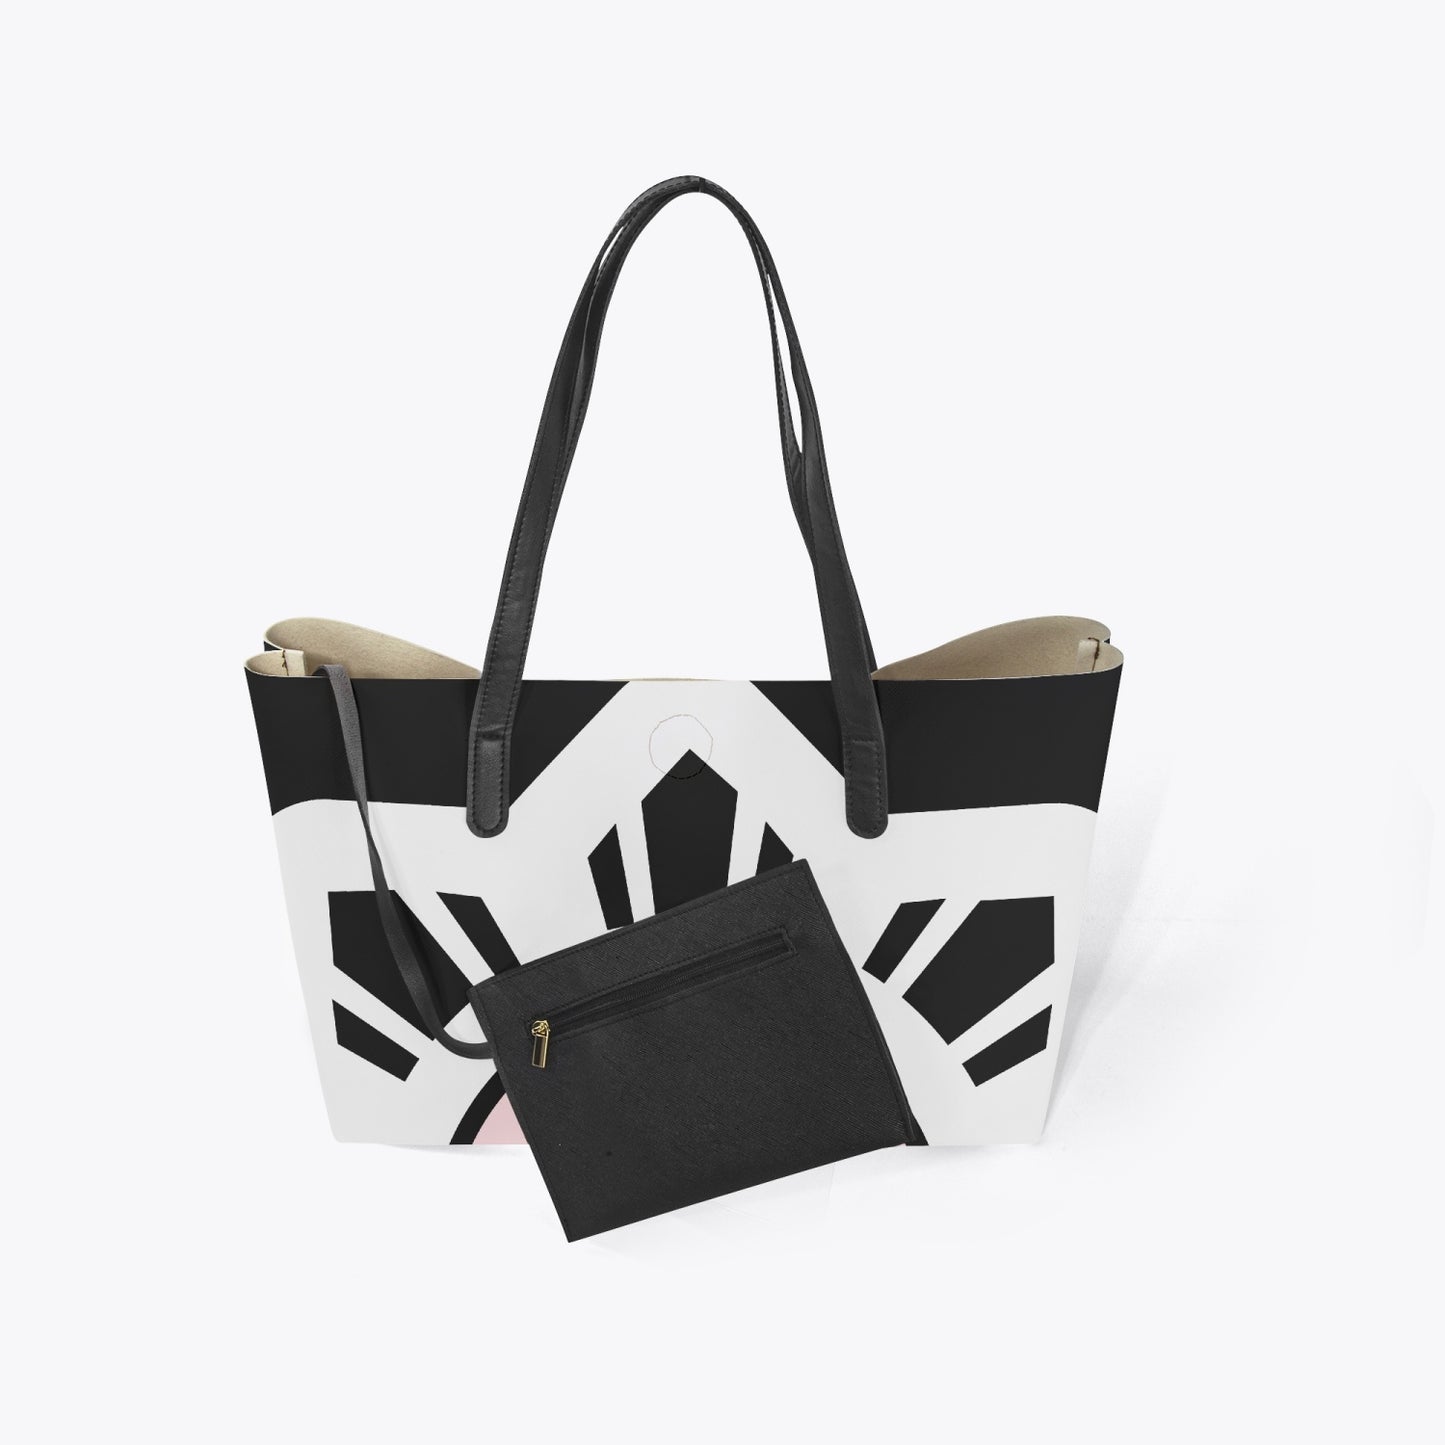 Tote Bag, Black, White, Pink, Gifts for her